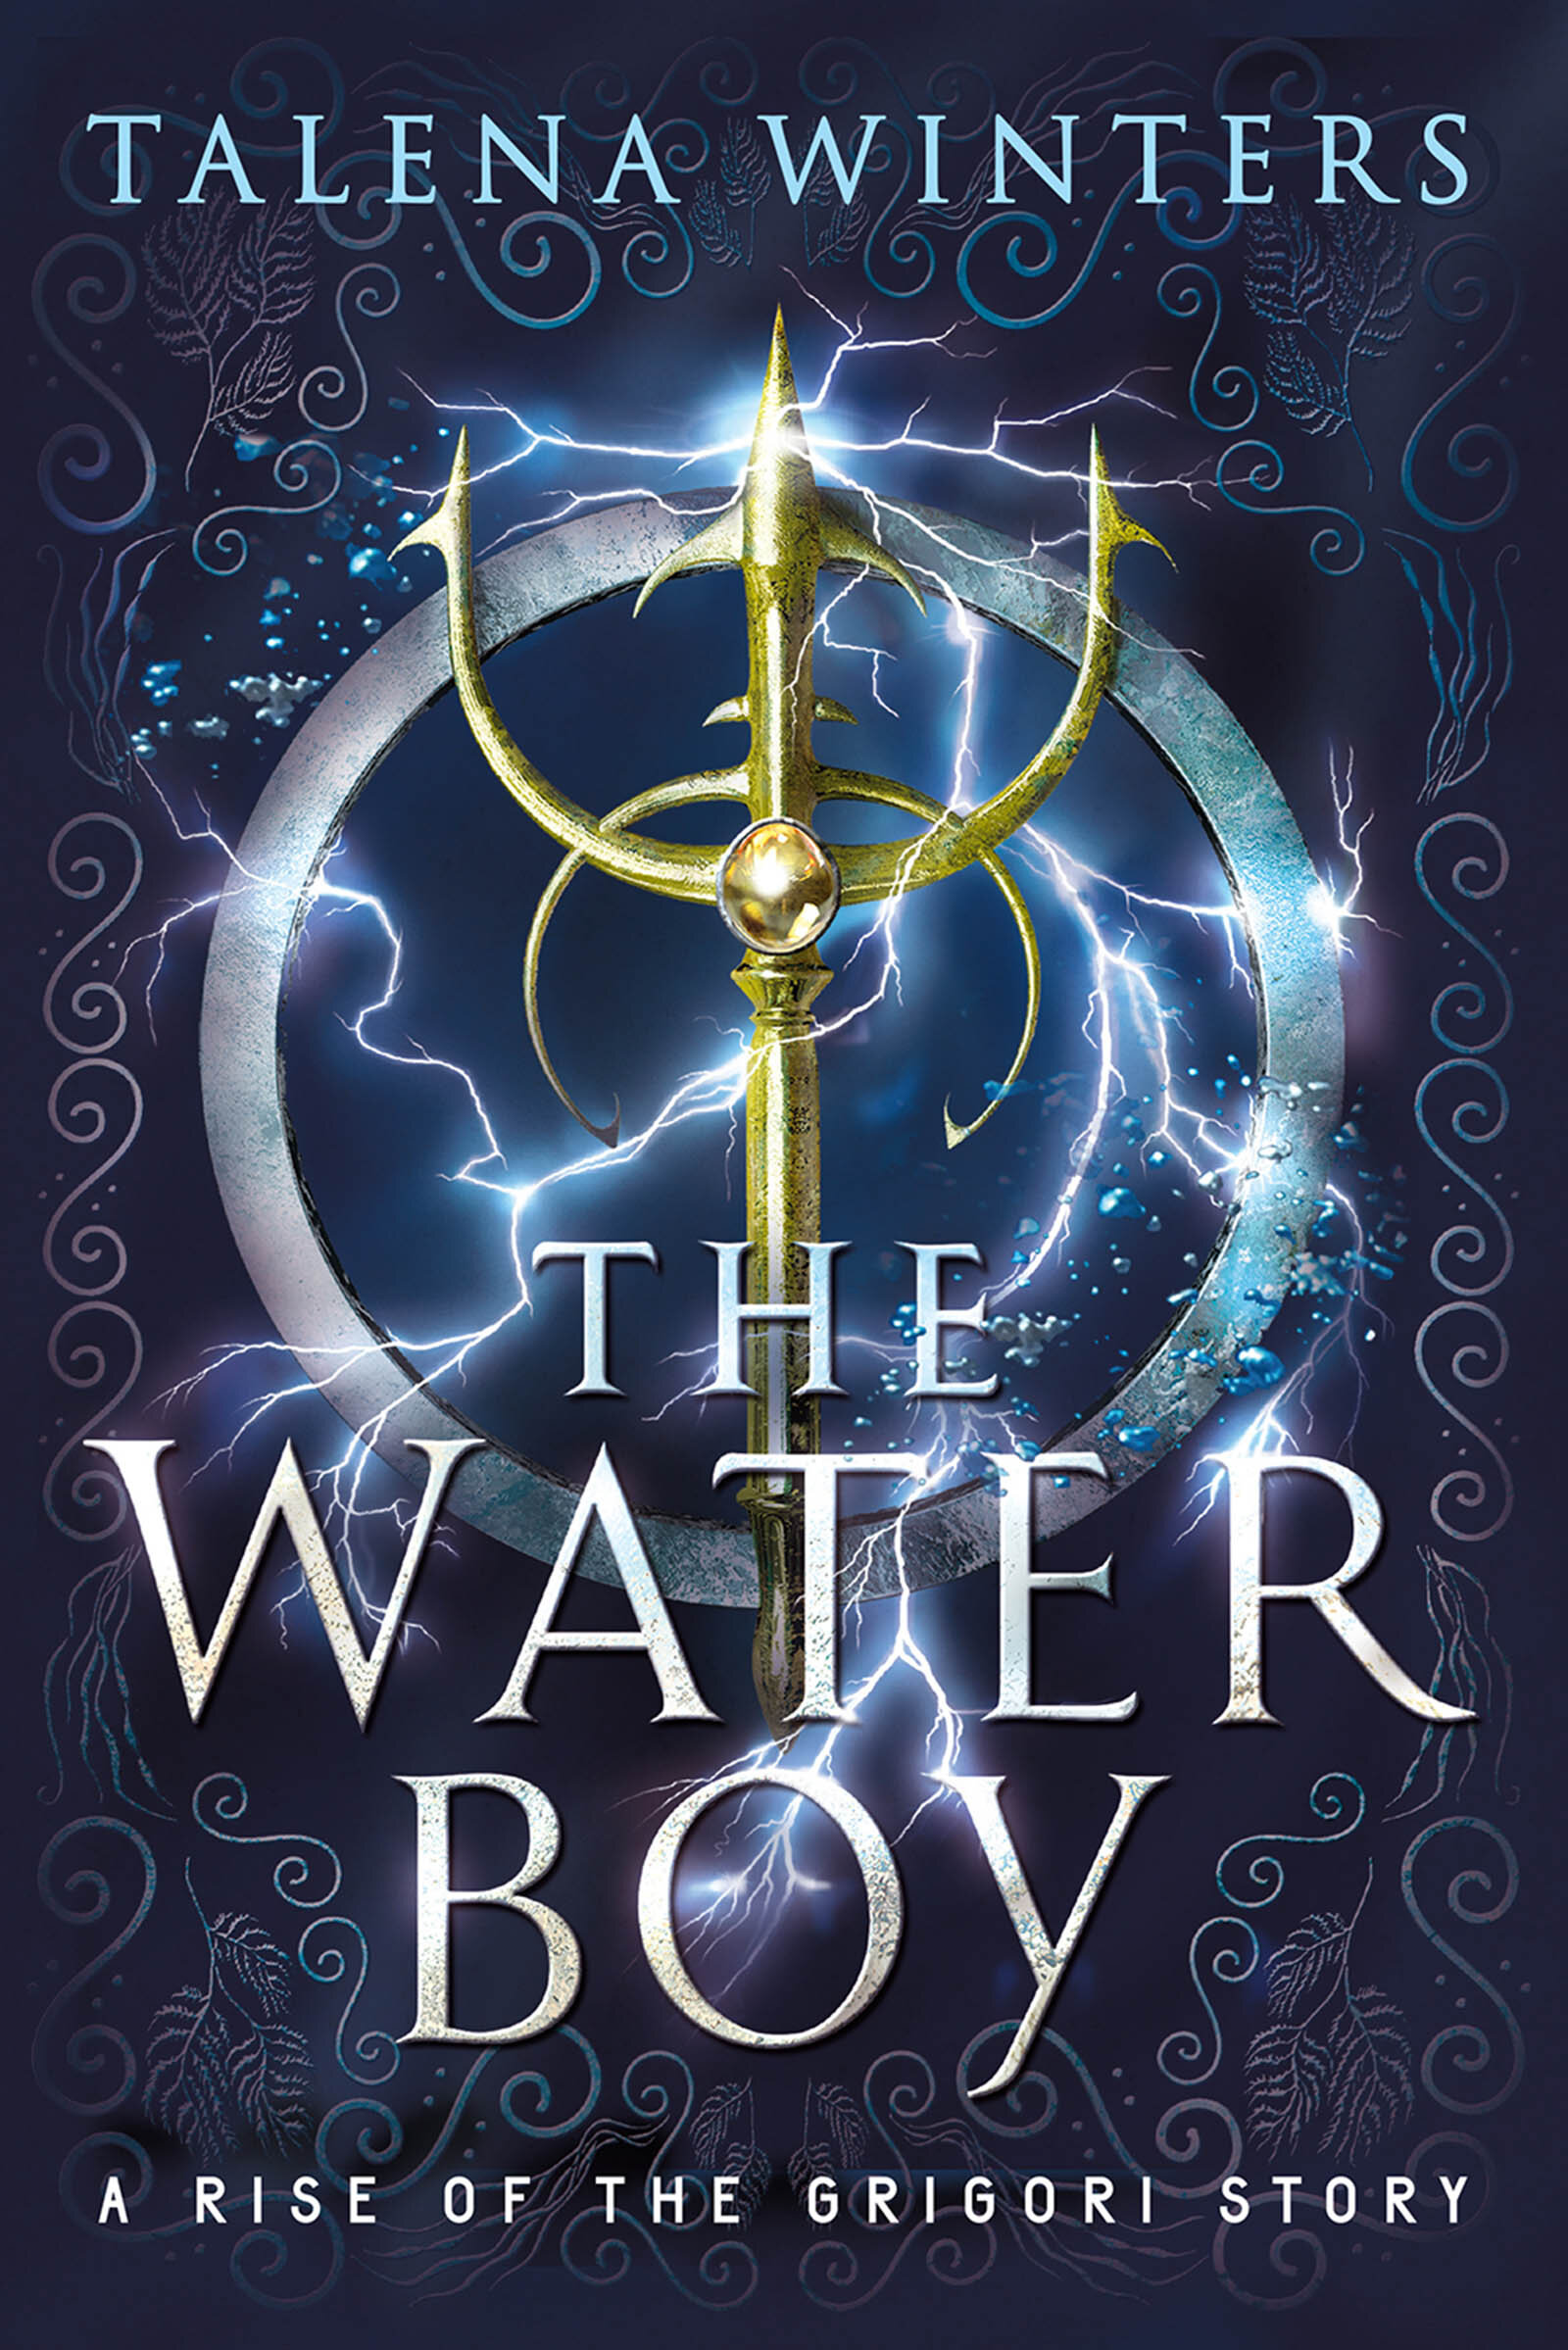 The Waterboy (A Rise of the Grigori Origin Story) (Copy)